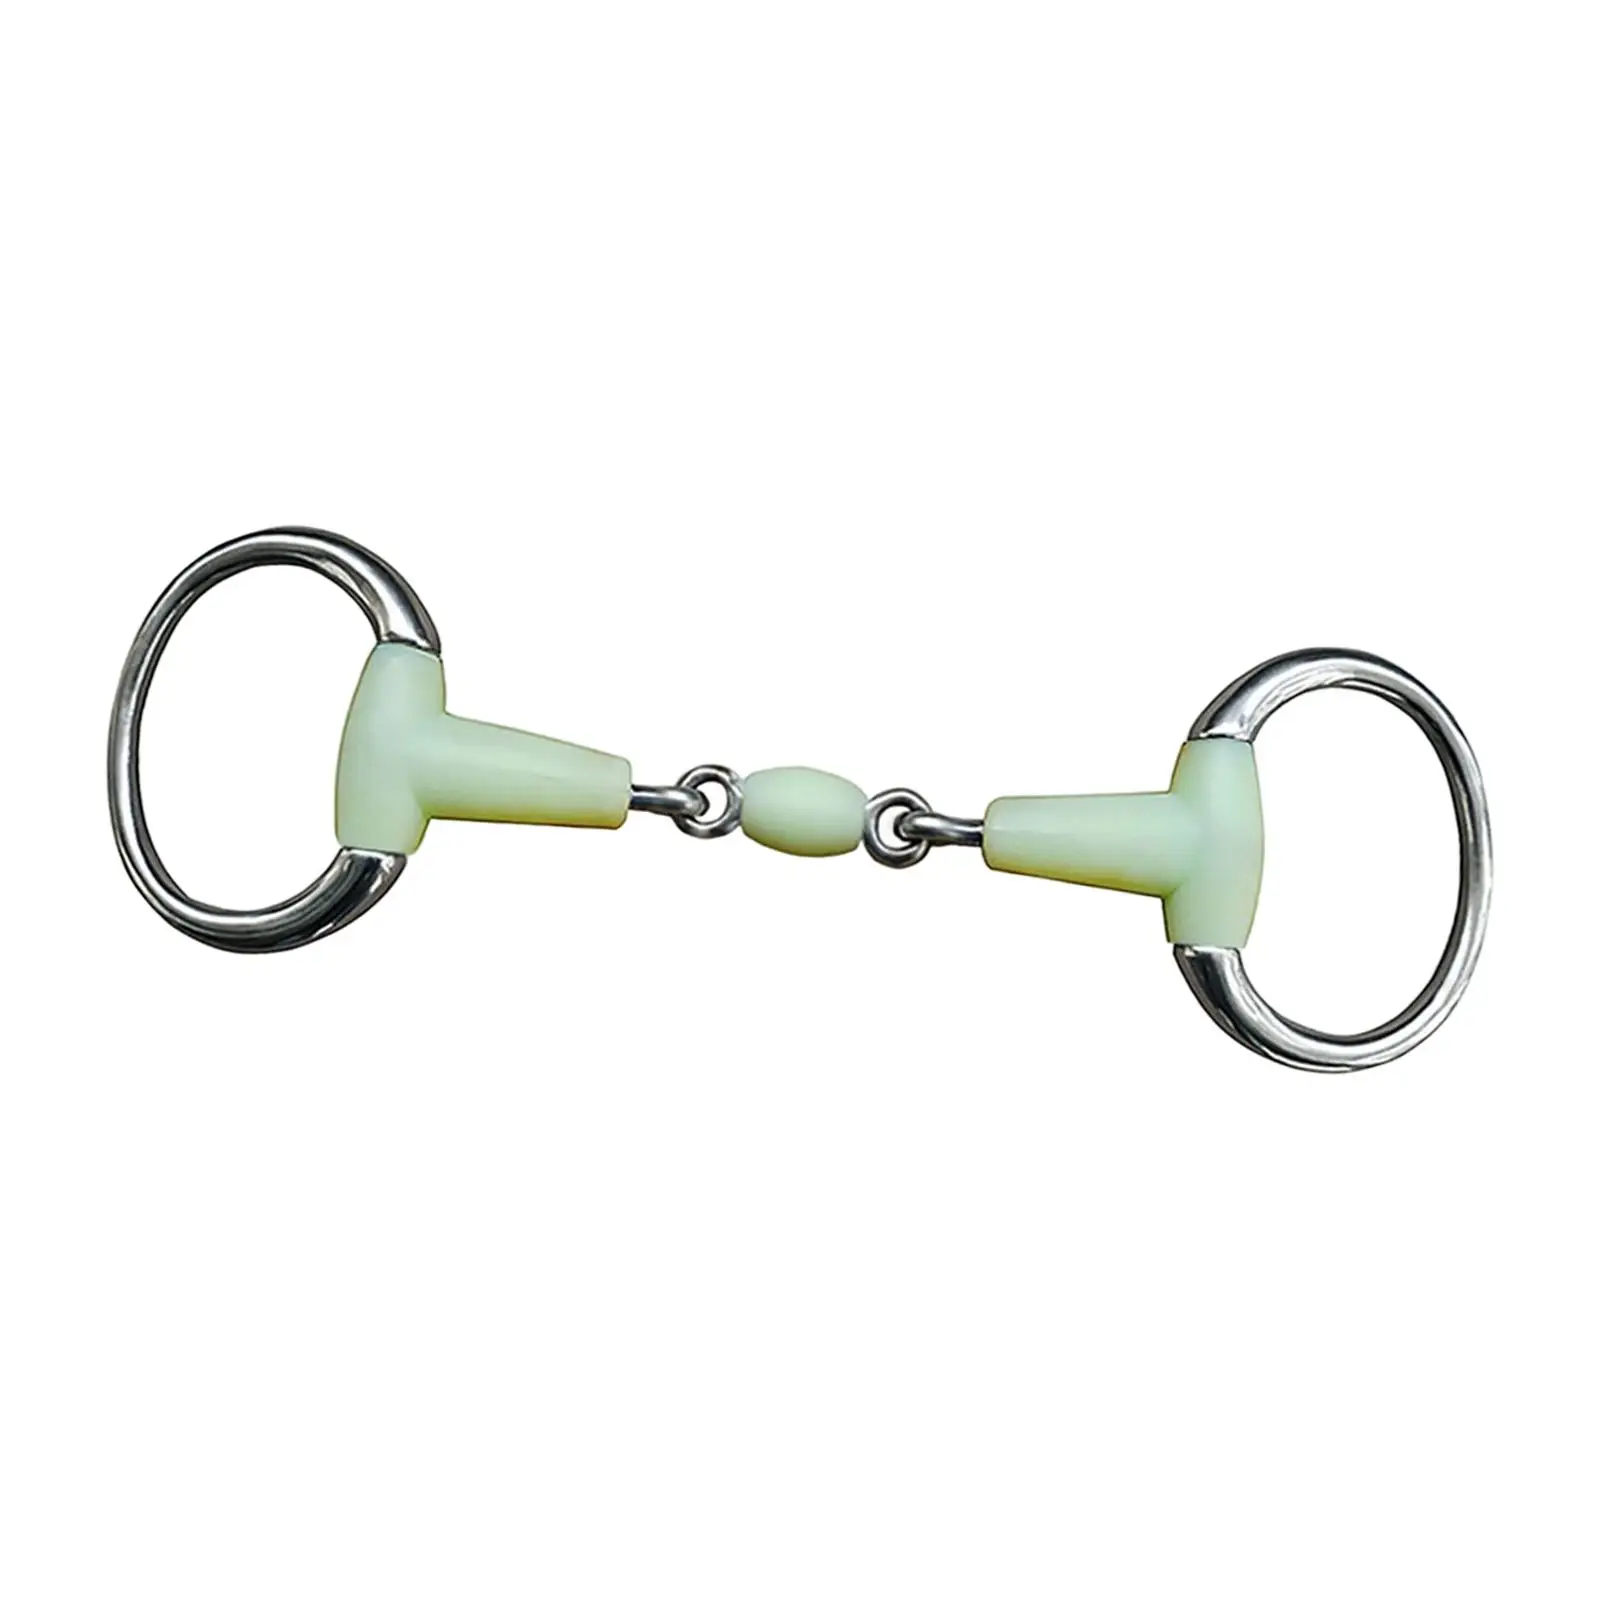 Horse Bit Mouth Supplies Wear Resistant for Horse Riding Equipment